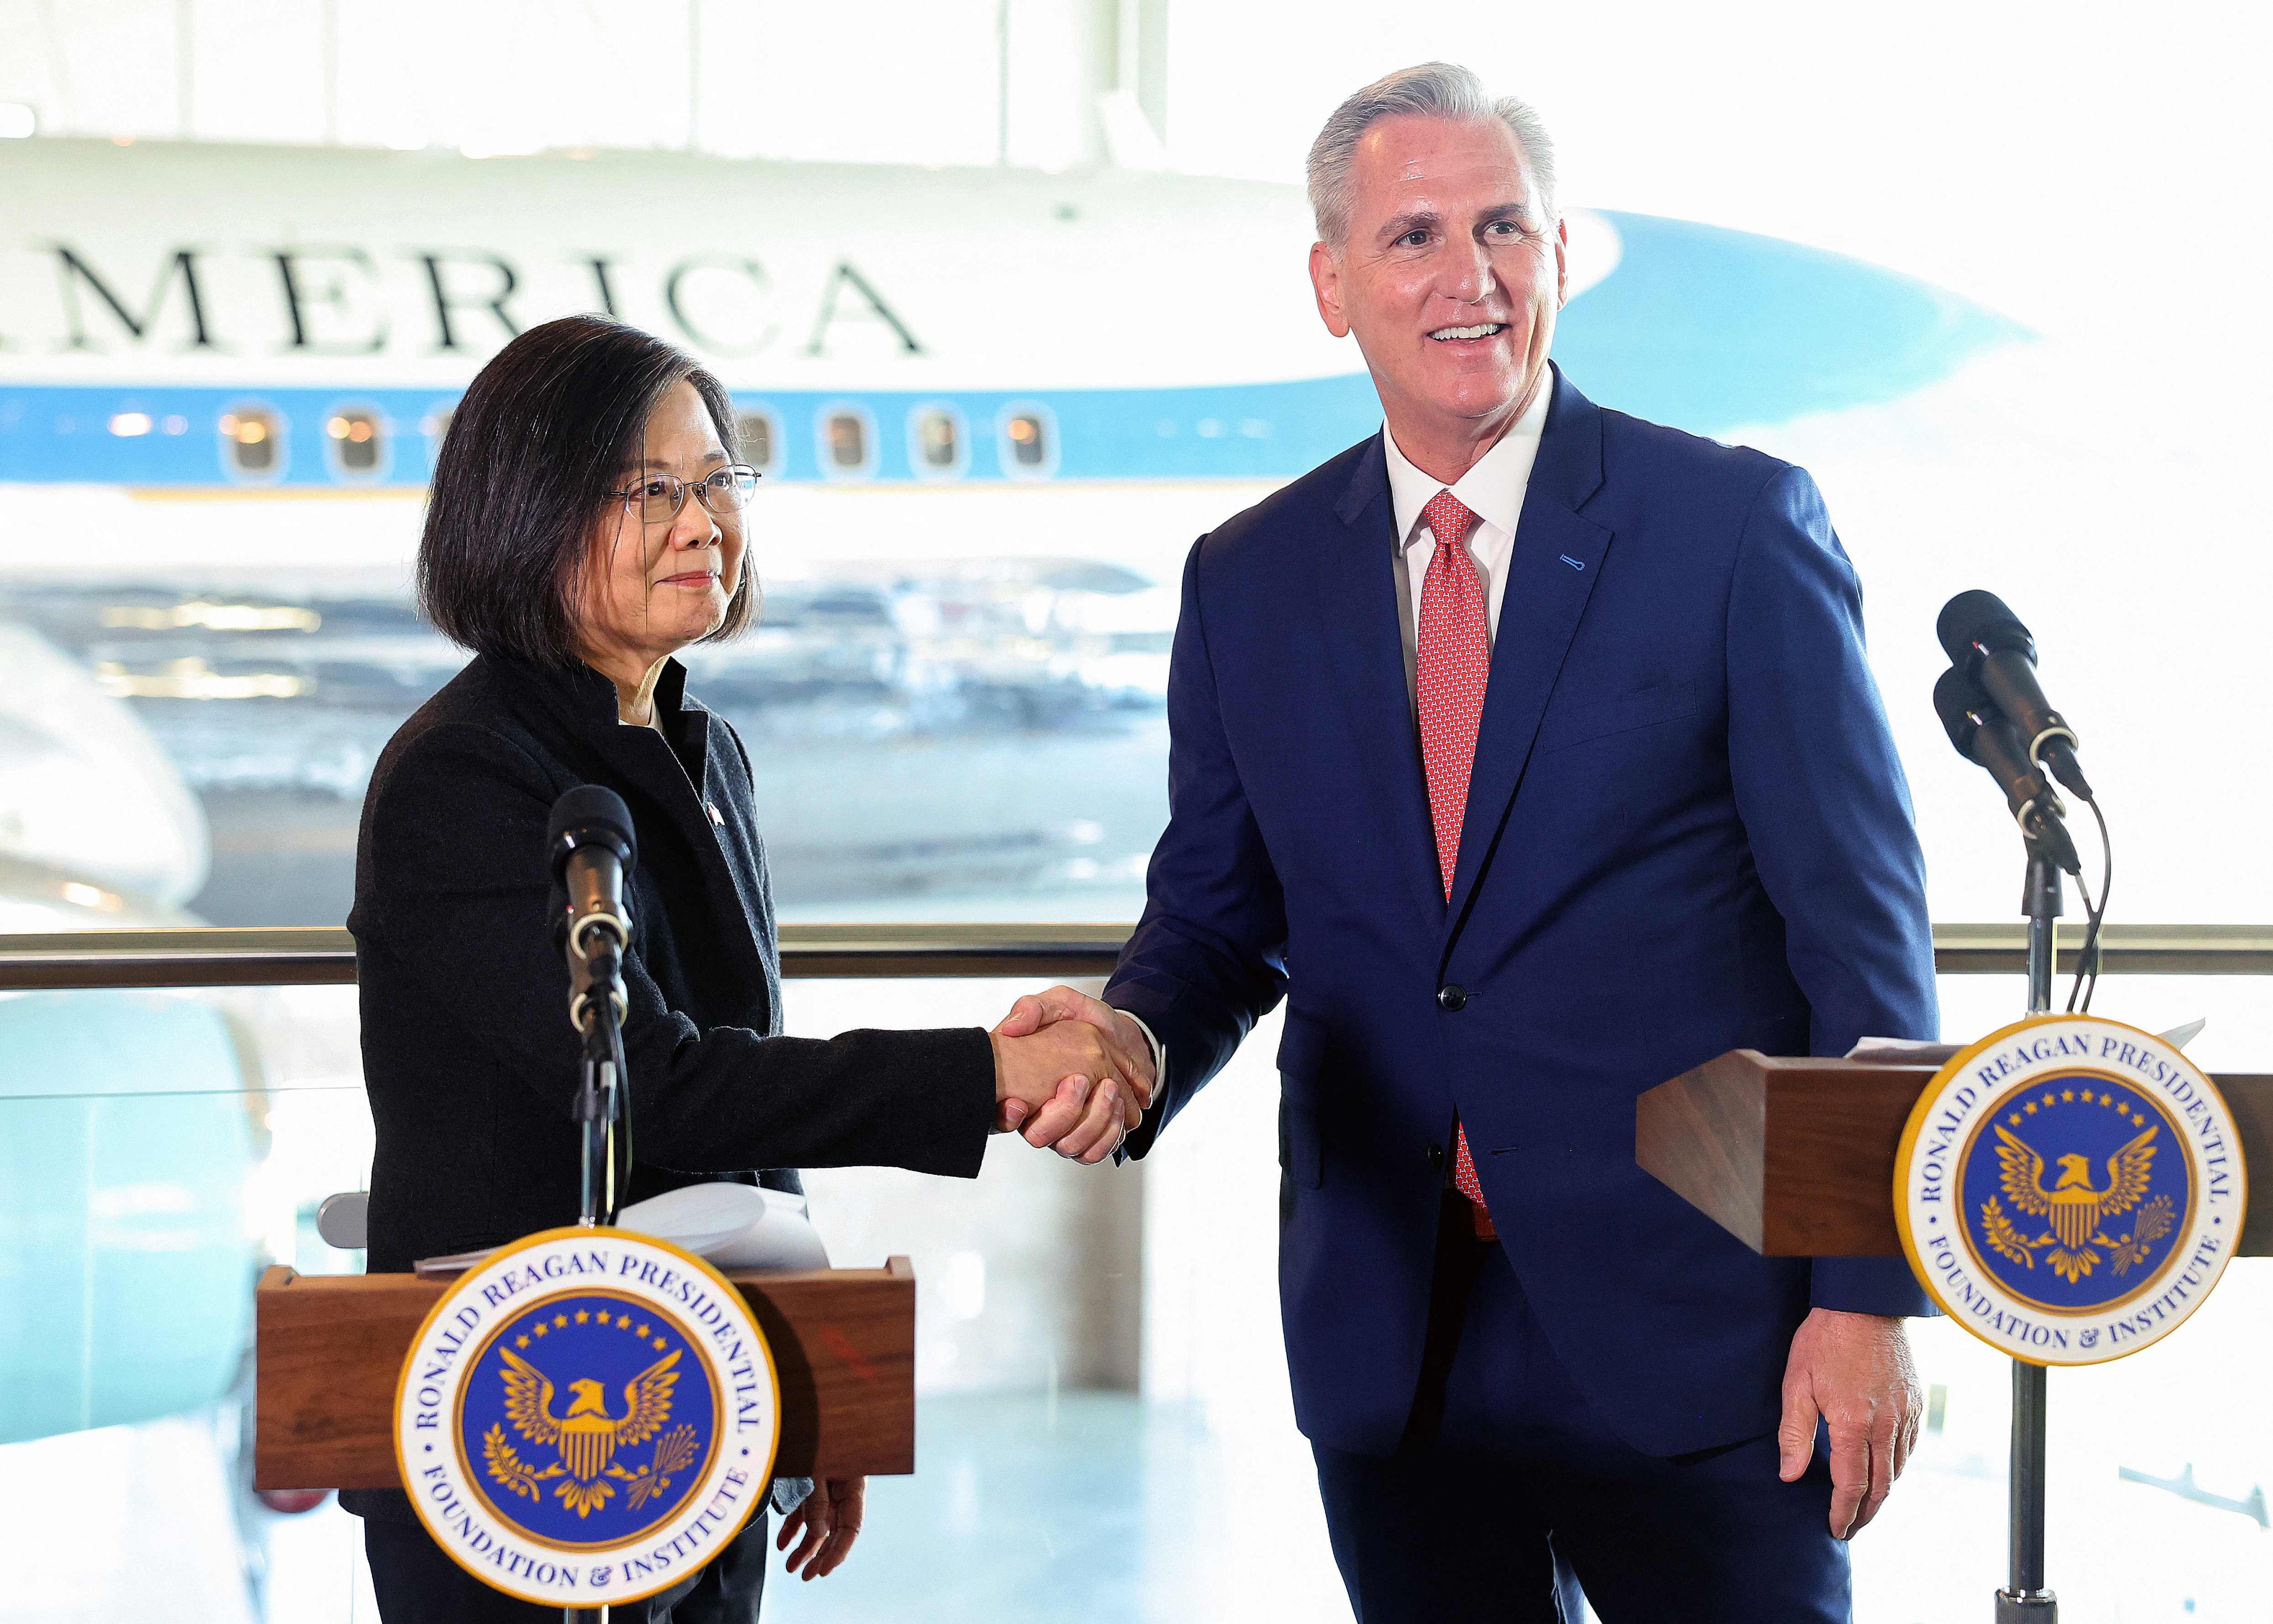 US Speaker of the House Kevin McCarthy and Taiwanese President Tsai Ing-wen shake hands after making statements to the press on April 5, 2023 in Simi Valley, California. Photo: Getty Images via AFP